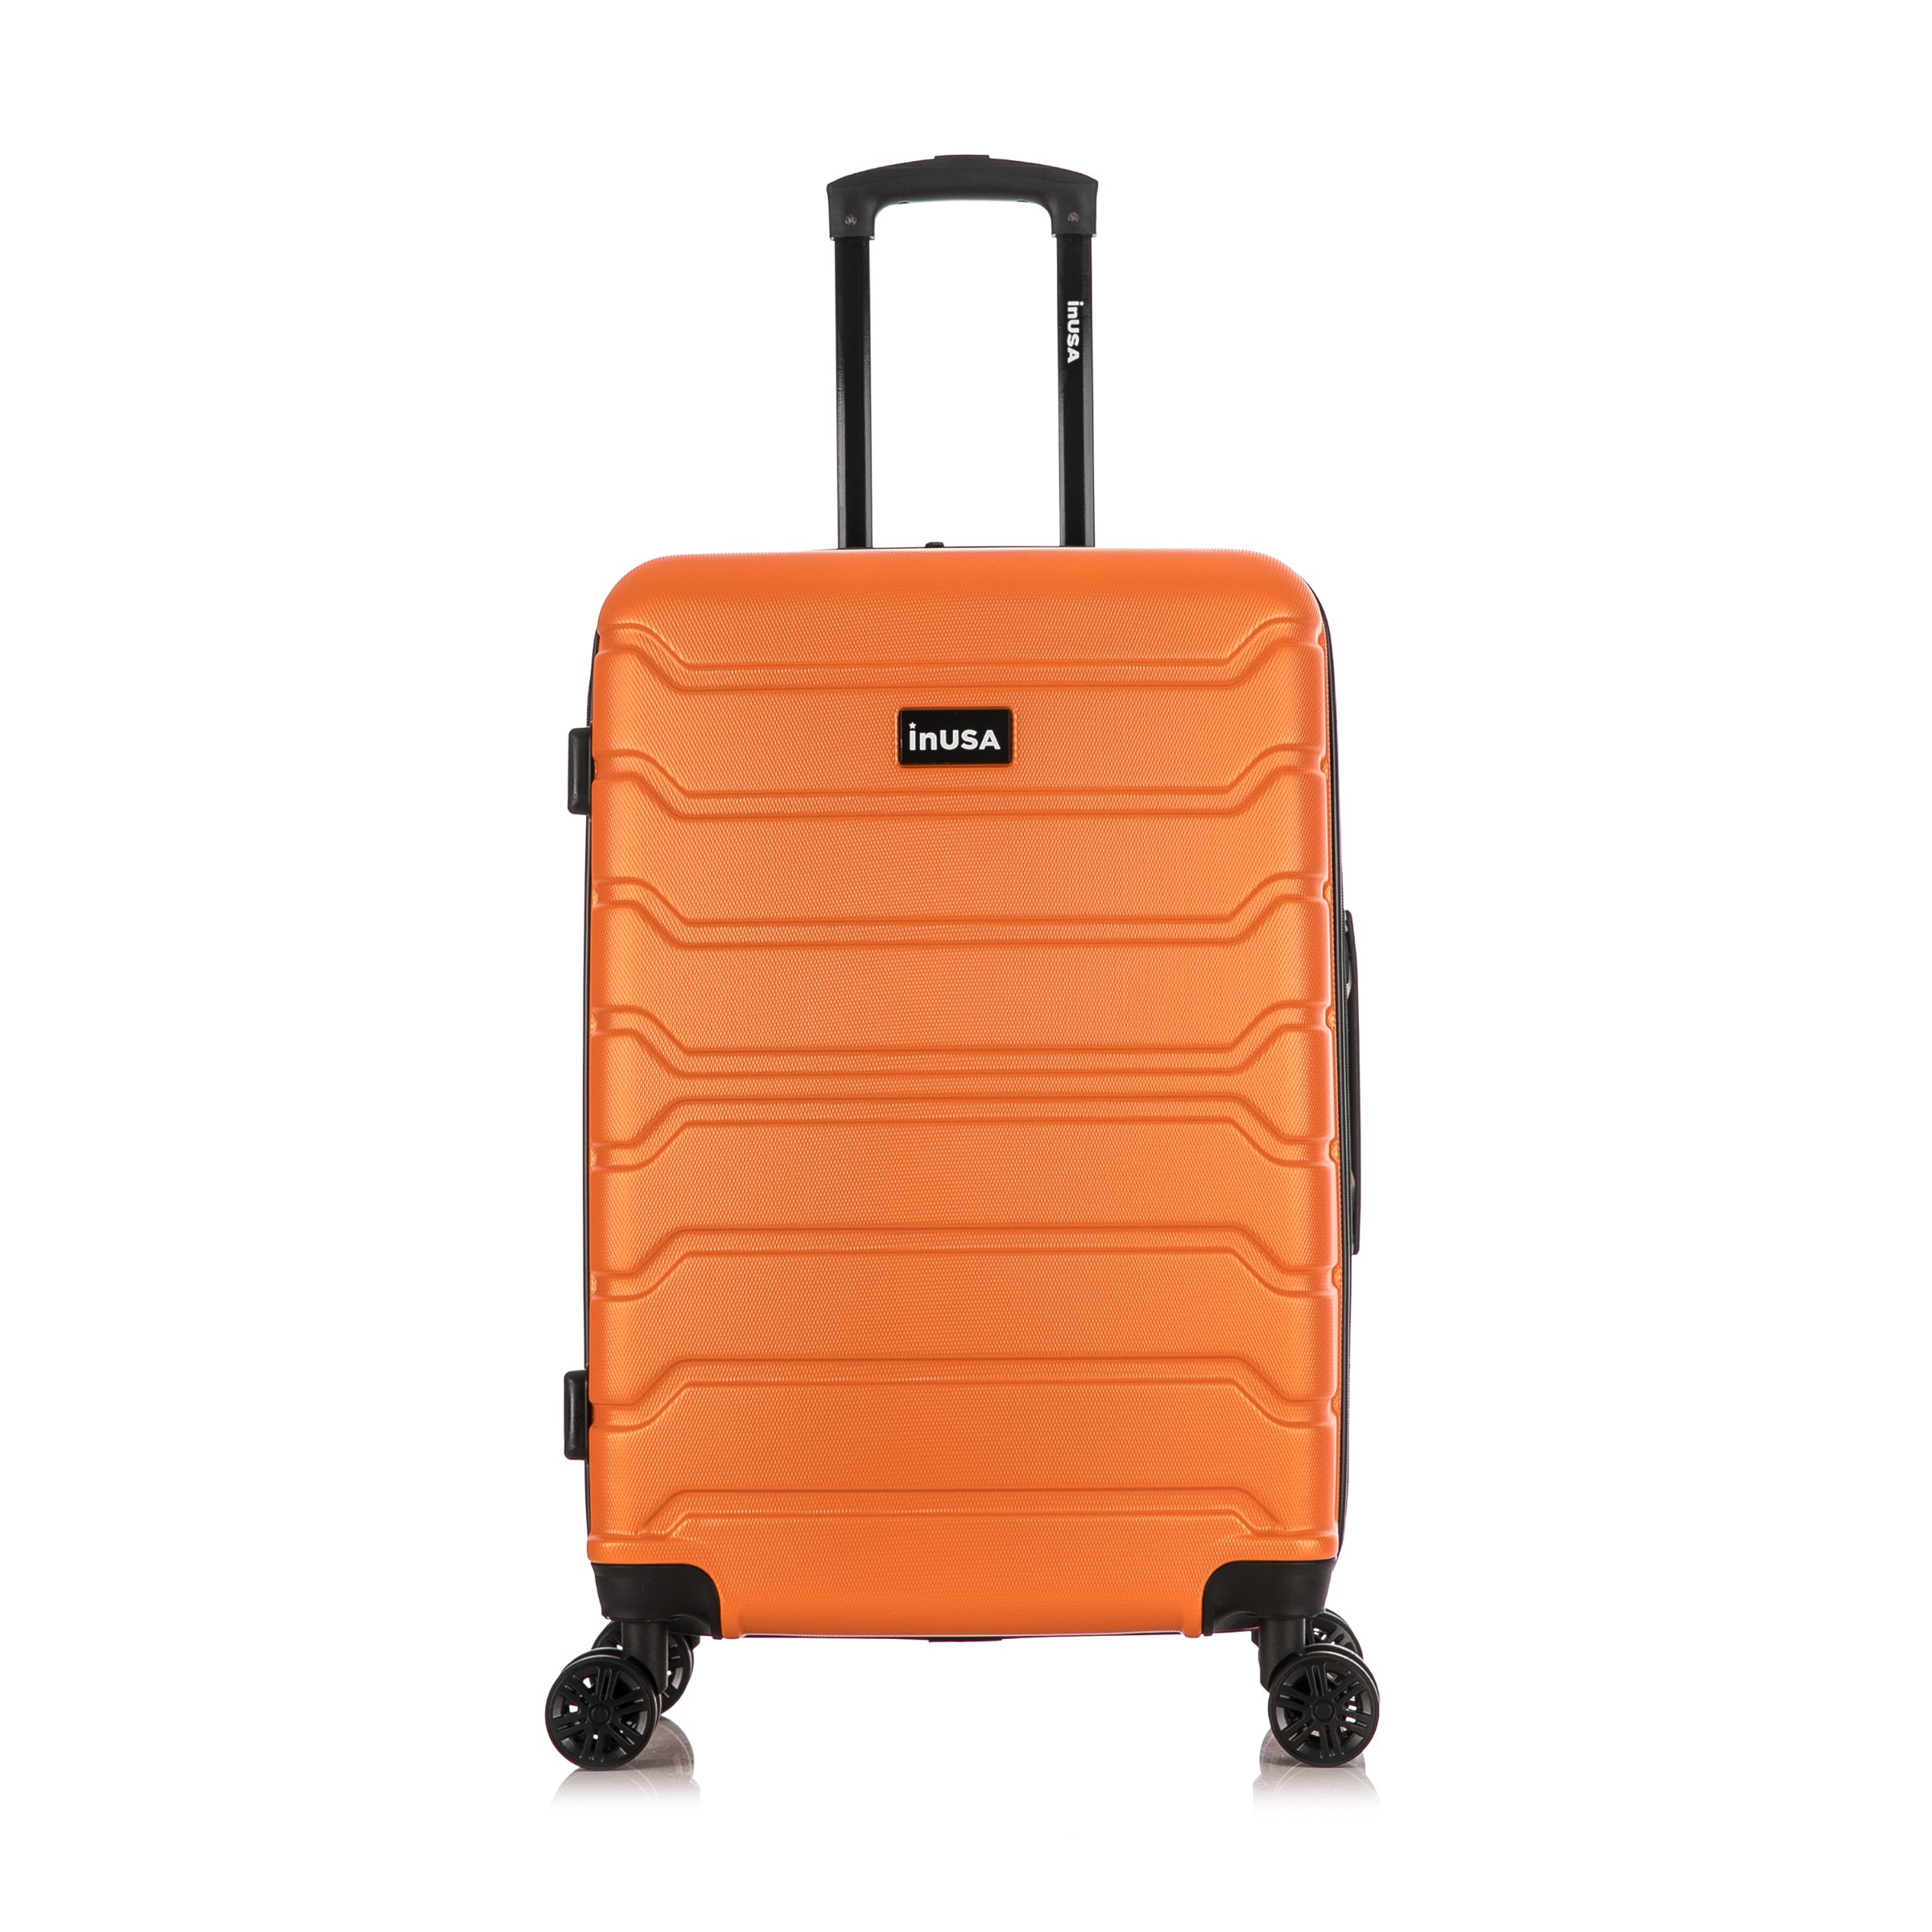 InUSA Trend 24" Hardside Lightweight Luggage with Spinner Wheels, Handle, and Trolley, Orange - image 3 of 12